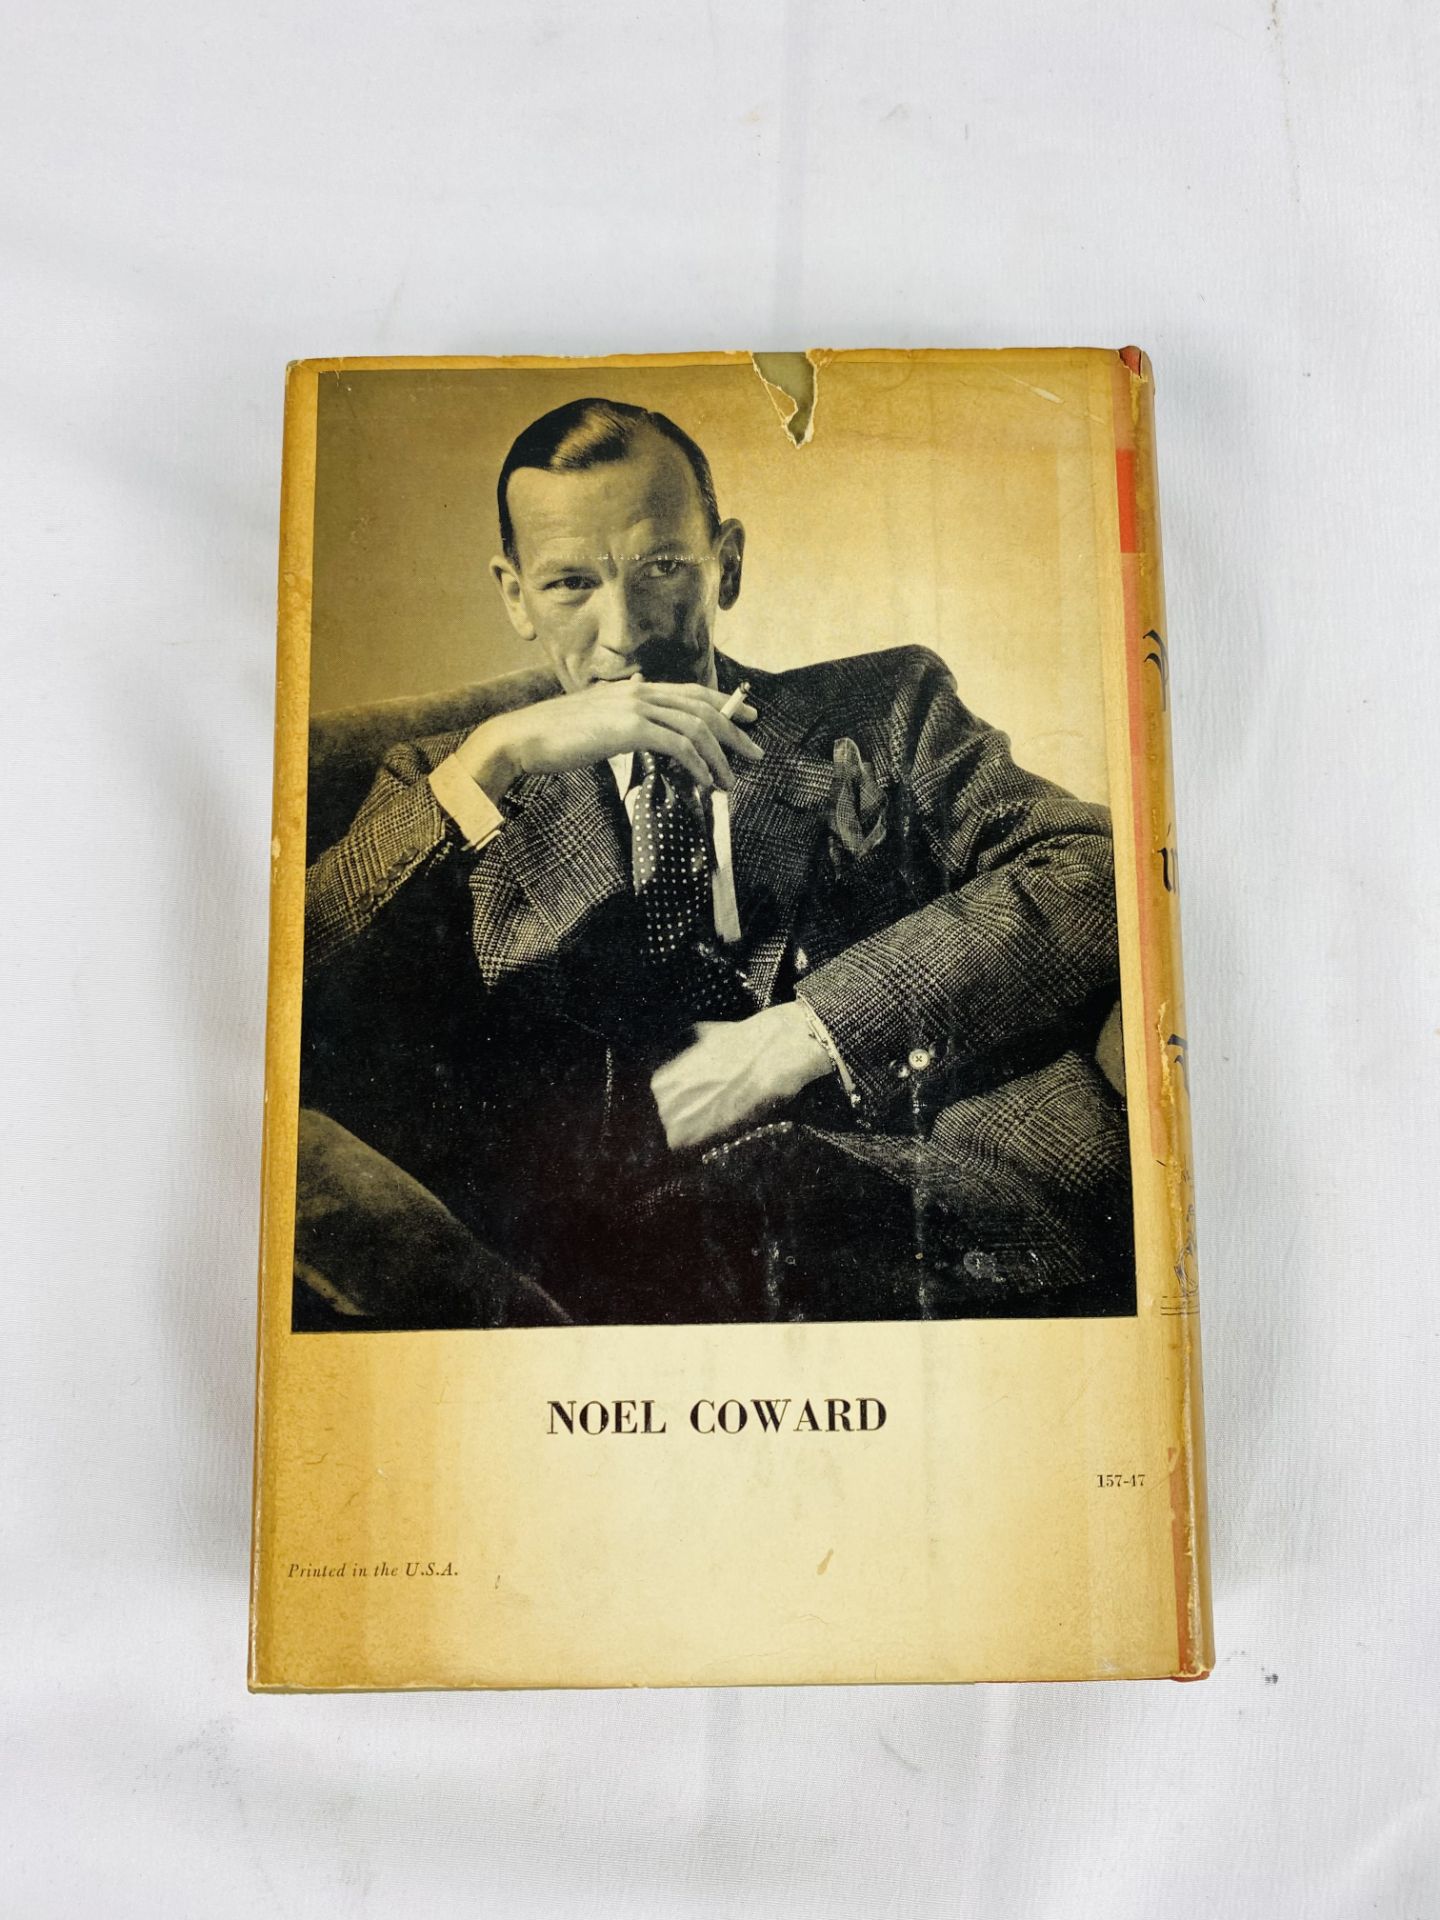 Noel Coward, Peace in our Time: A Play, published Doubleday and Company - Image 3 of 4